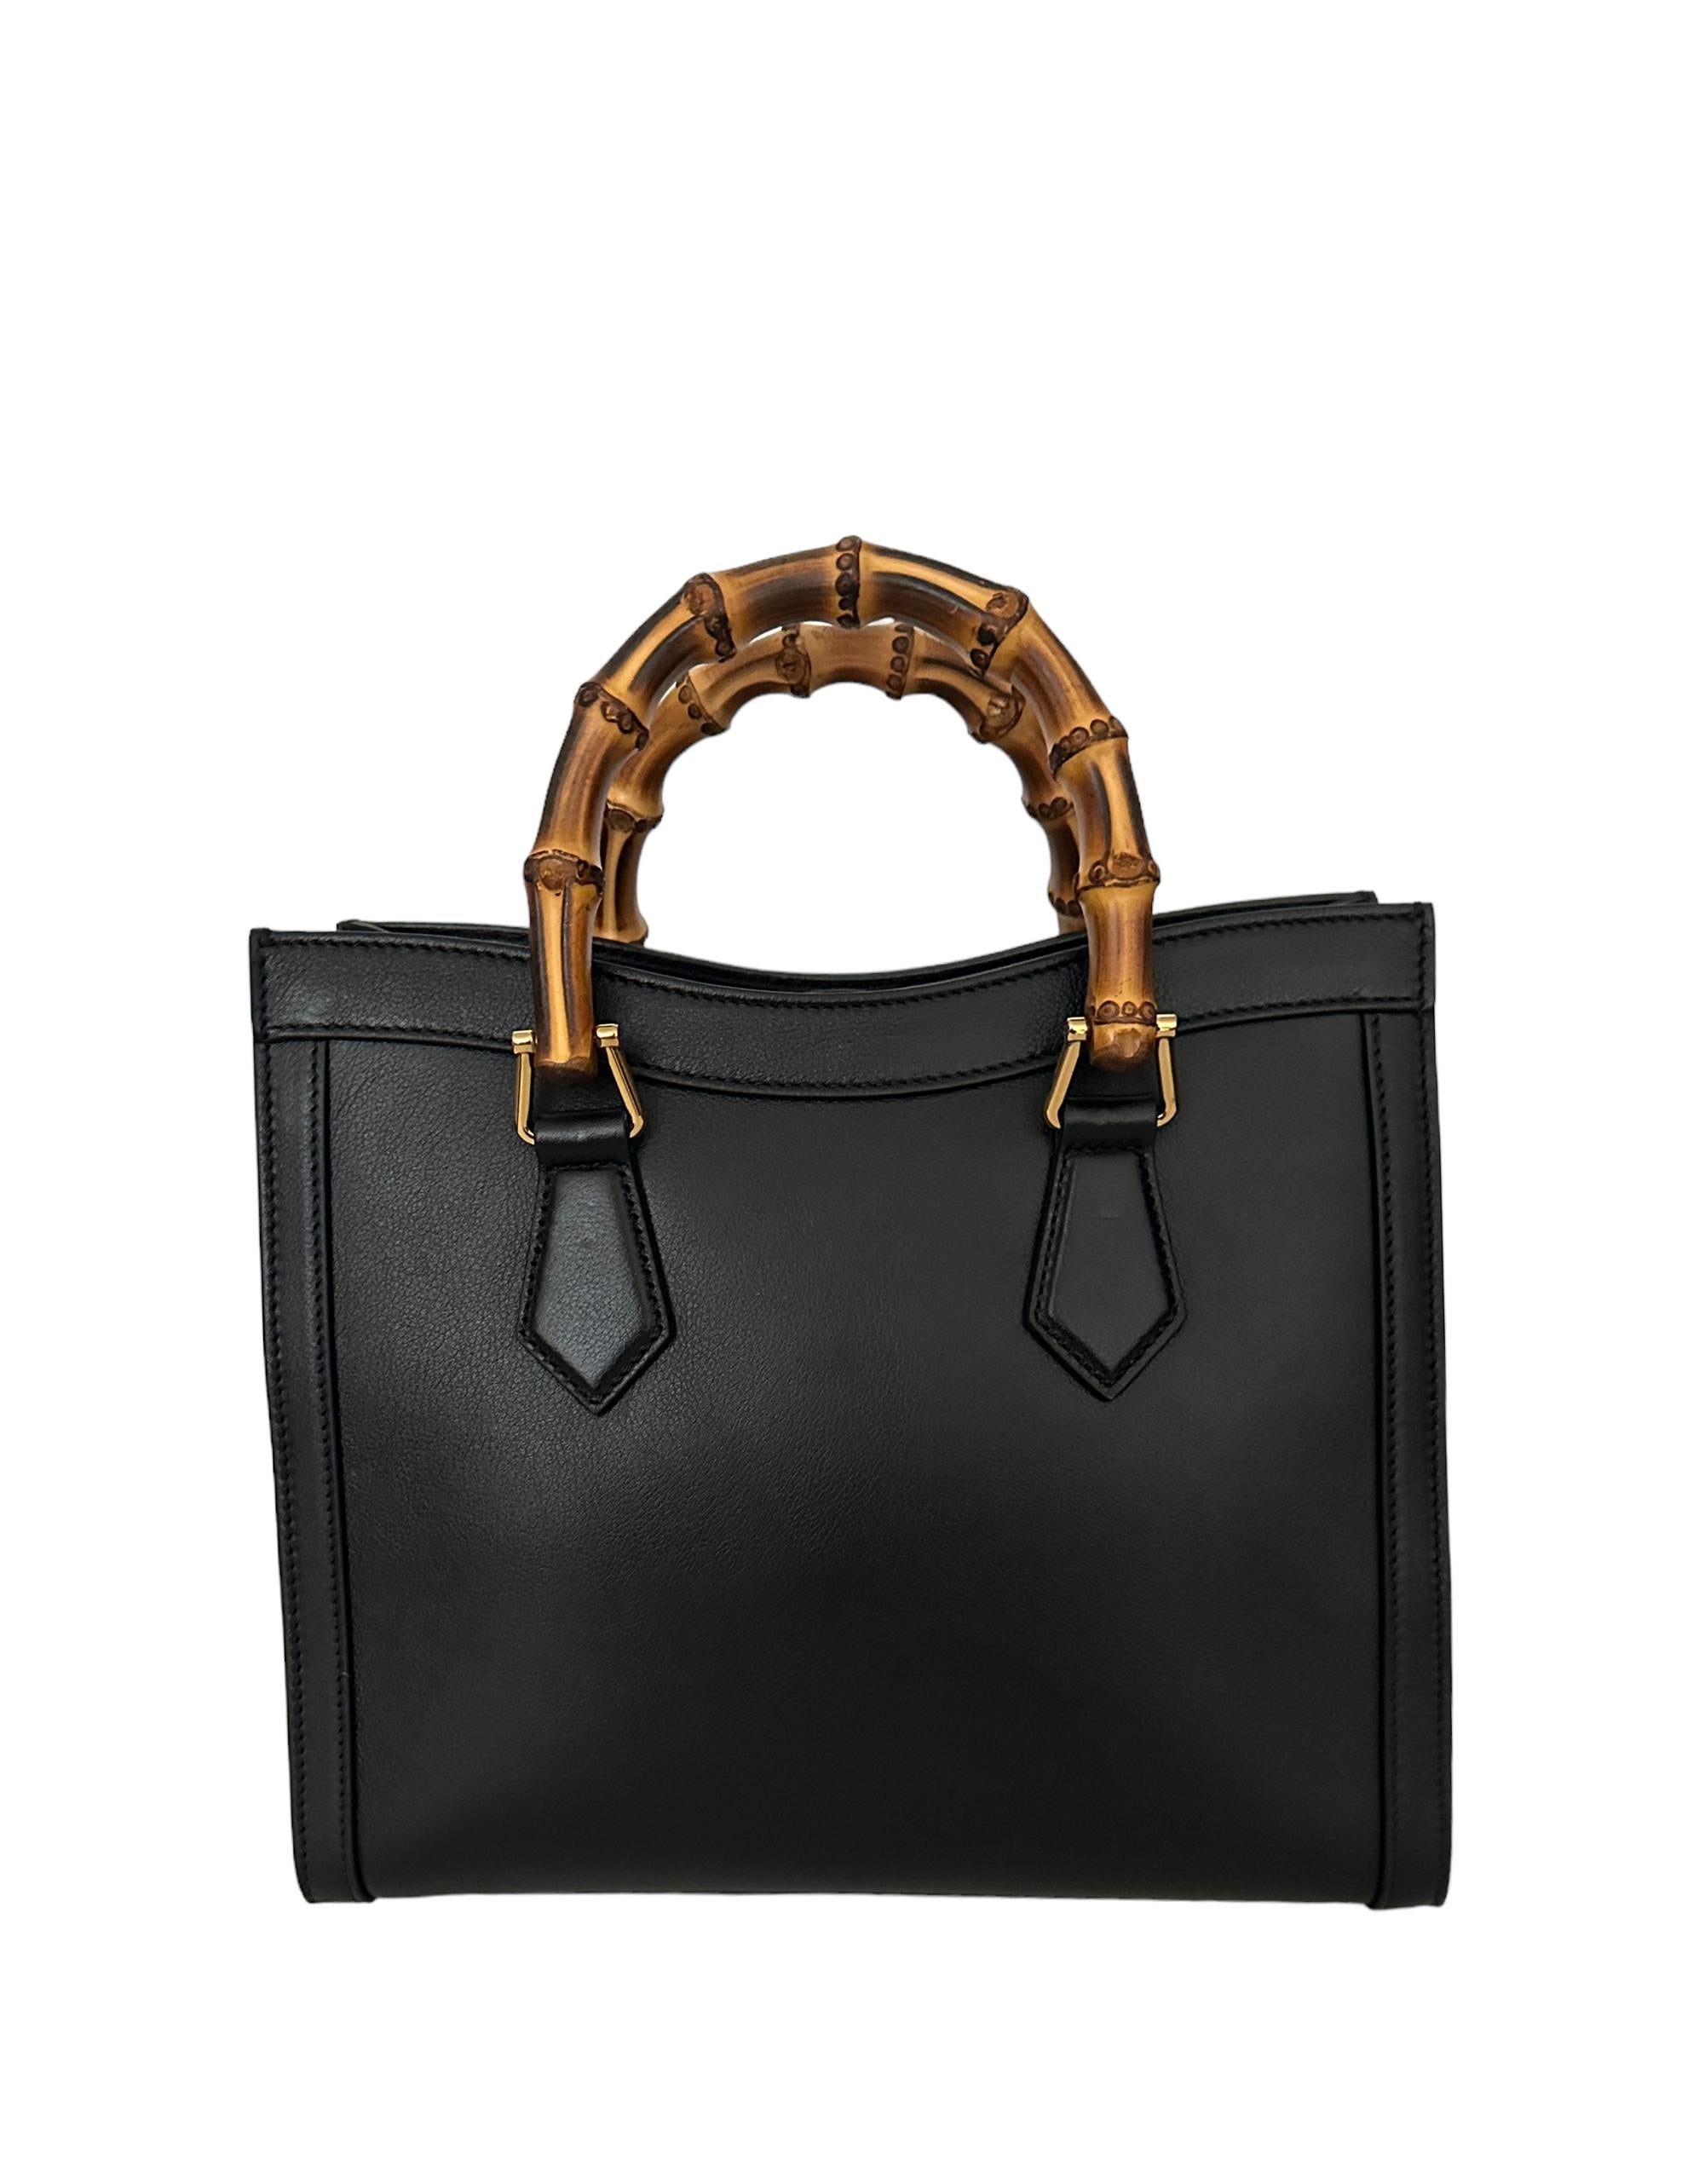 Gucci Black Small Calfskin Leather Diana Bamboo Bag w/ Strap

Made In: Italy
Color: Black
Hardware: Goldtone
Materials: Calfskin leather
Lining: Microfiber lining with a suede-like finish
Closure/Opening: Center tab with magnet
Interior Pockets: One